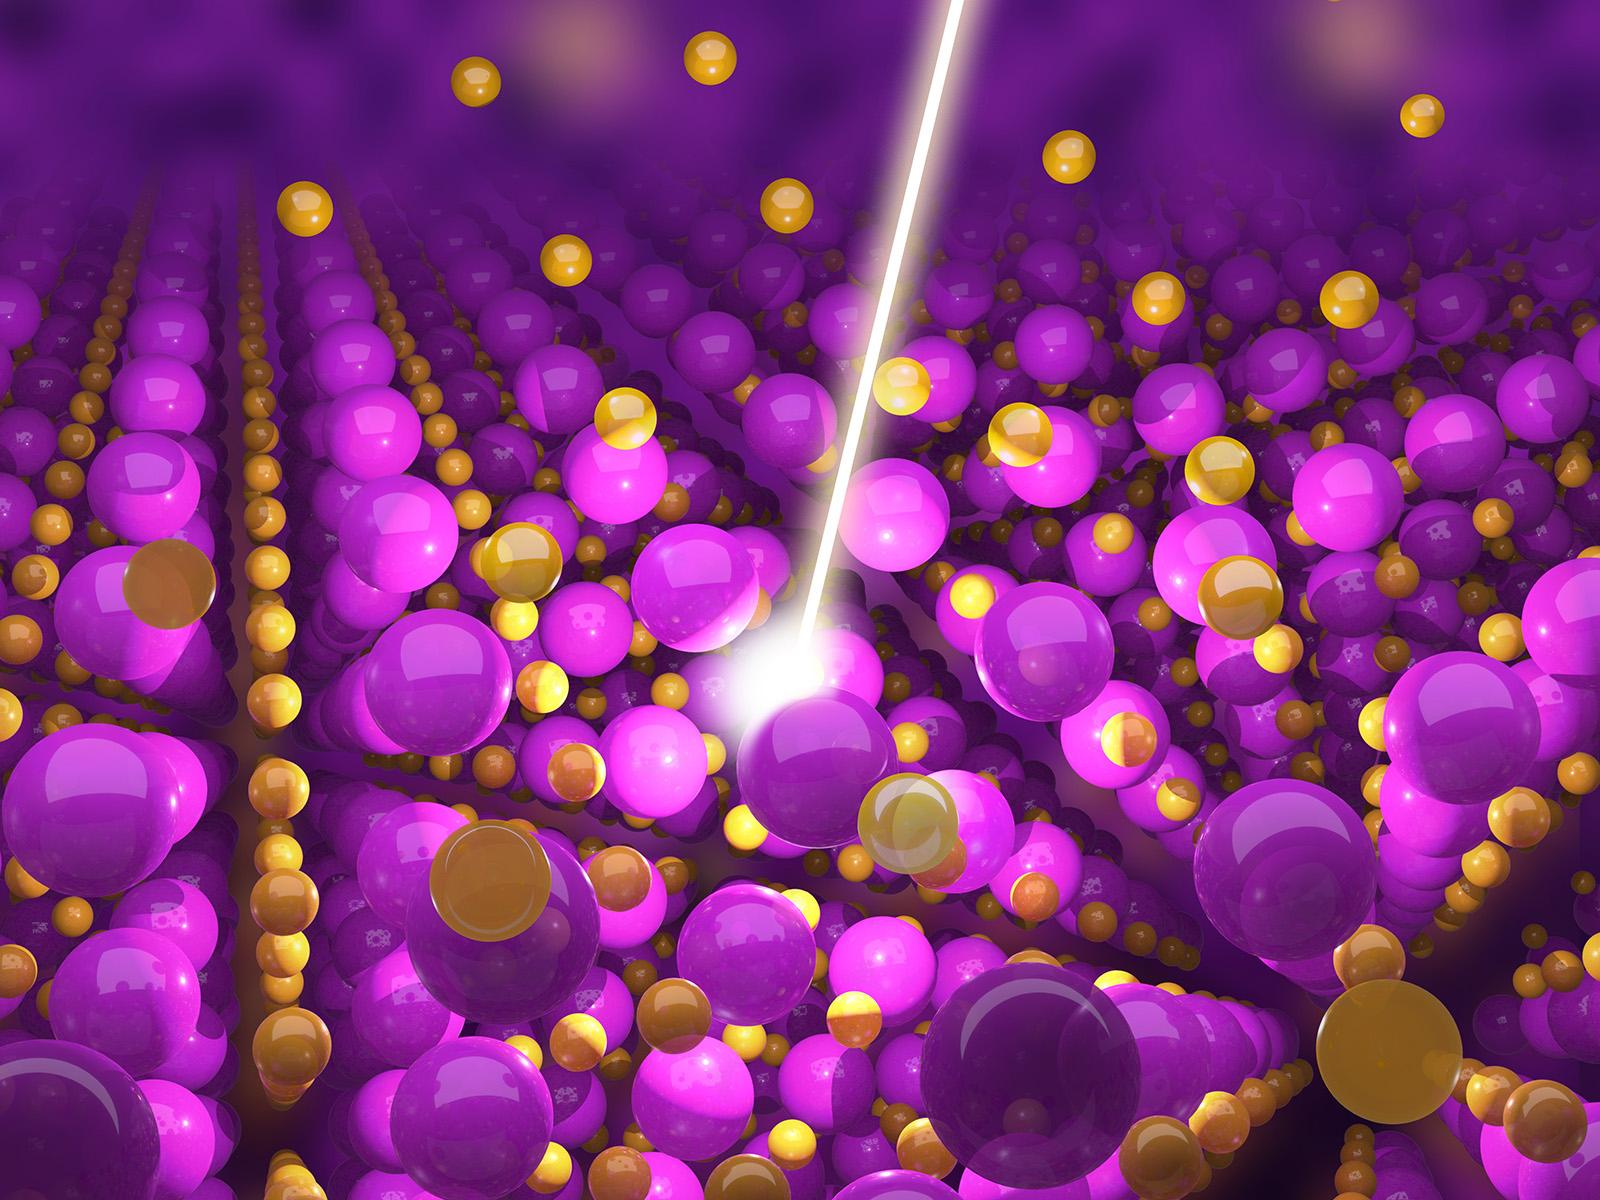 Purple and gold atoms show the structure of uranium dioxide.